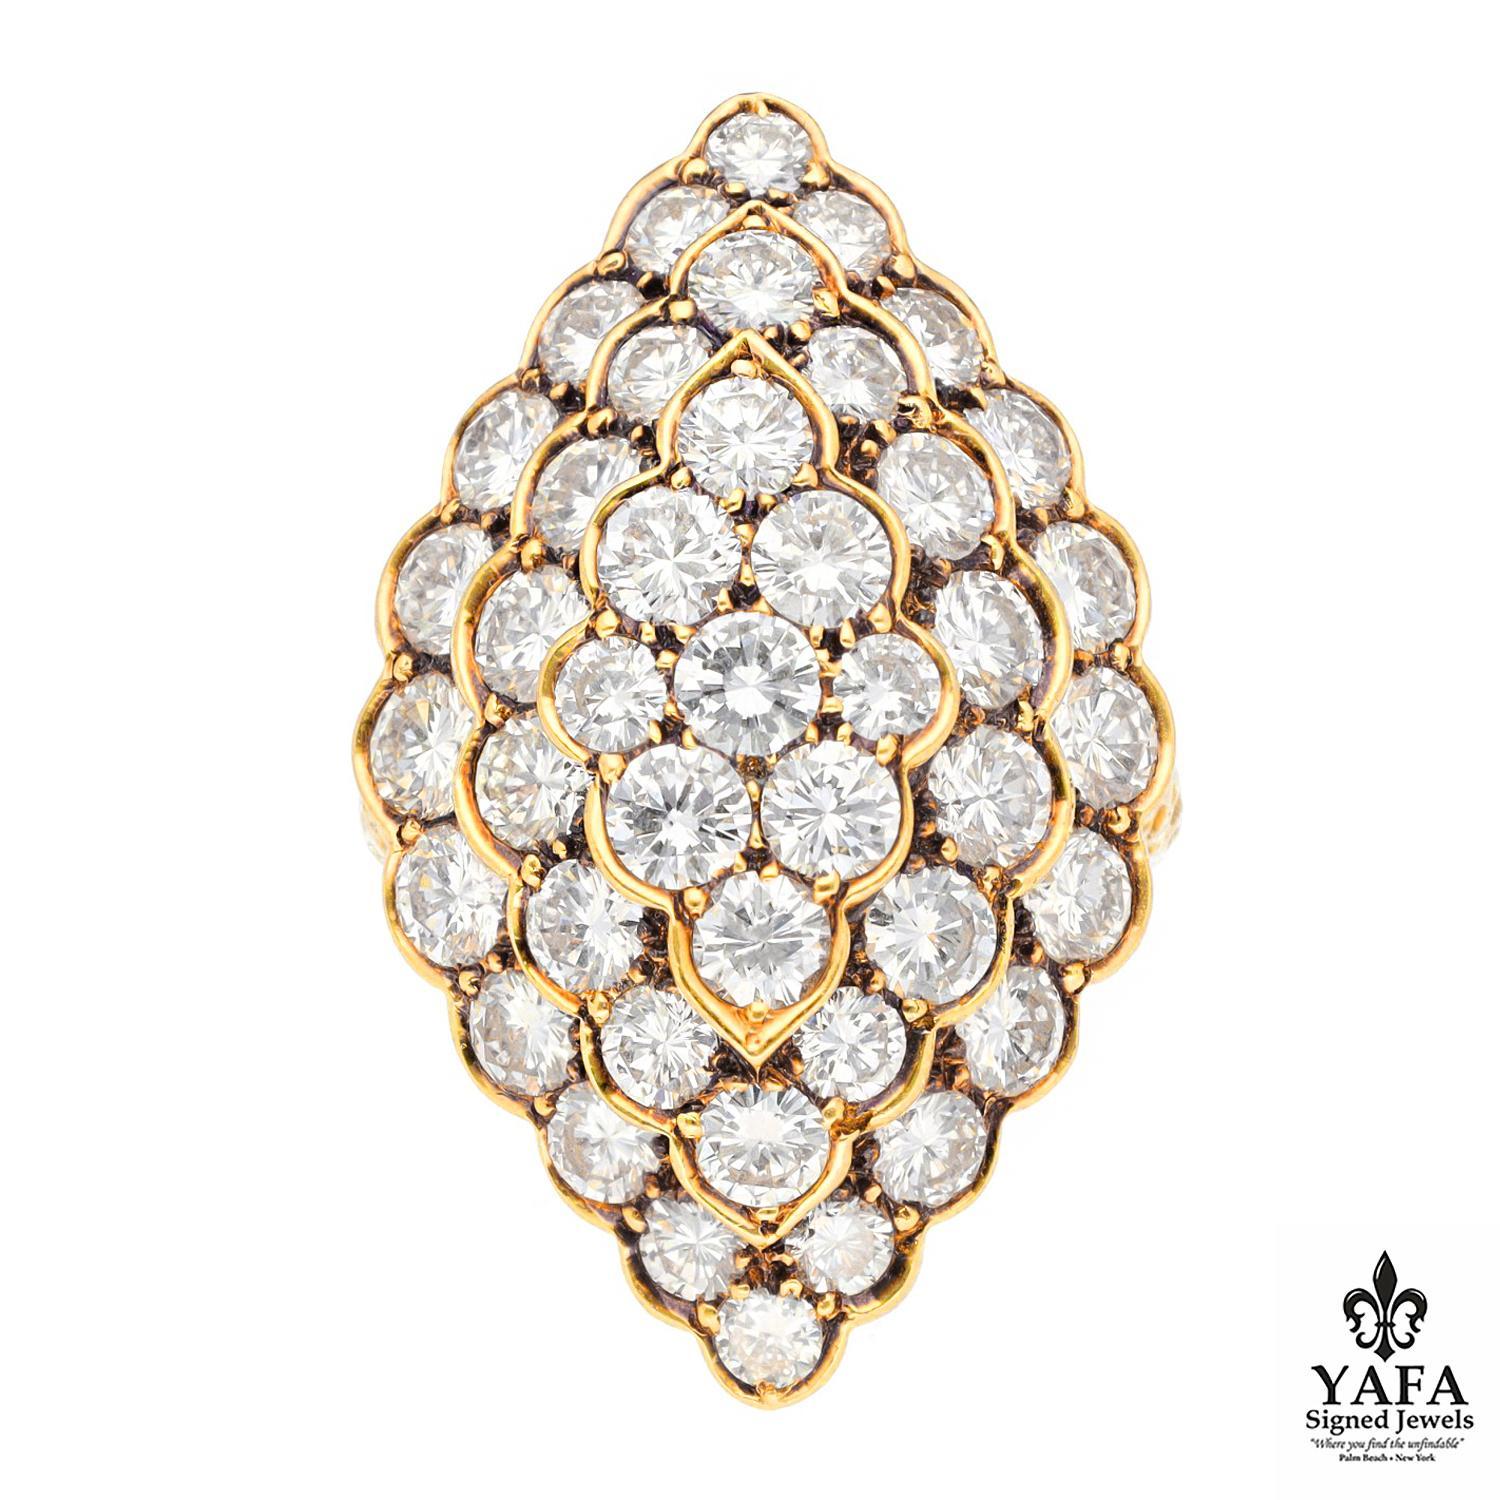 Van Cleef & Arpels Marquise Shaped Scalloped Design Ring.
43 Round Brilliant Diamonds and Hammered Shank.
Circa - 1980's
Size - 5.25
18K Yellow Gold
Signed - VCA